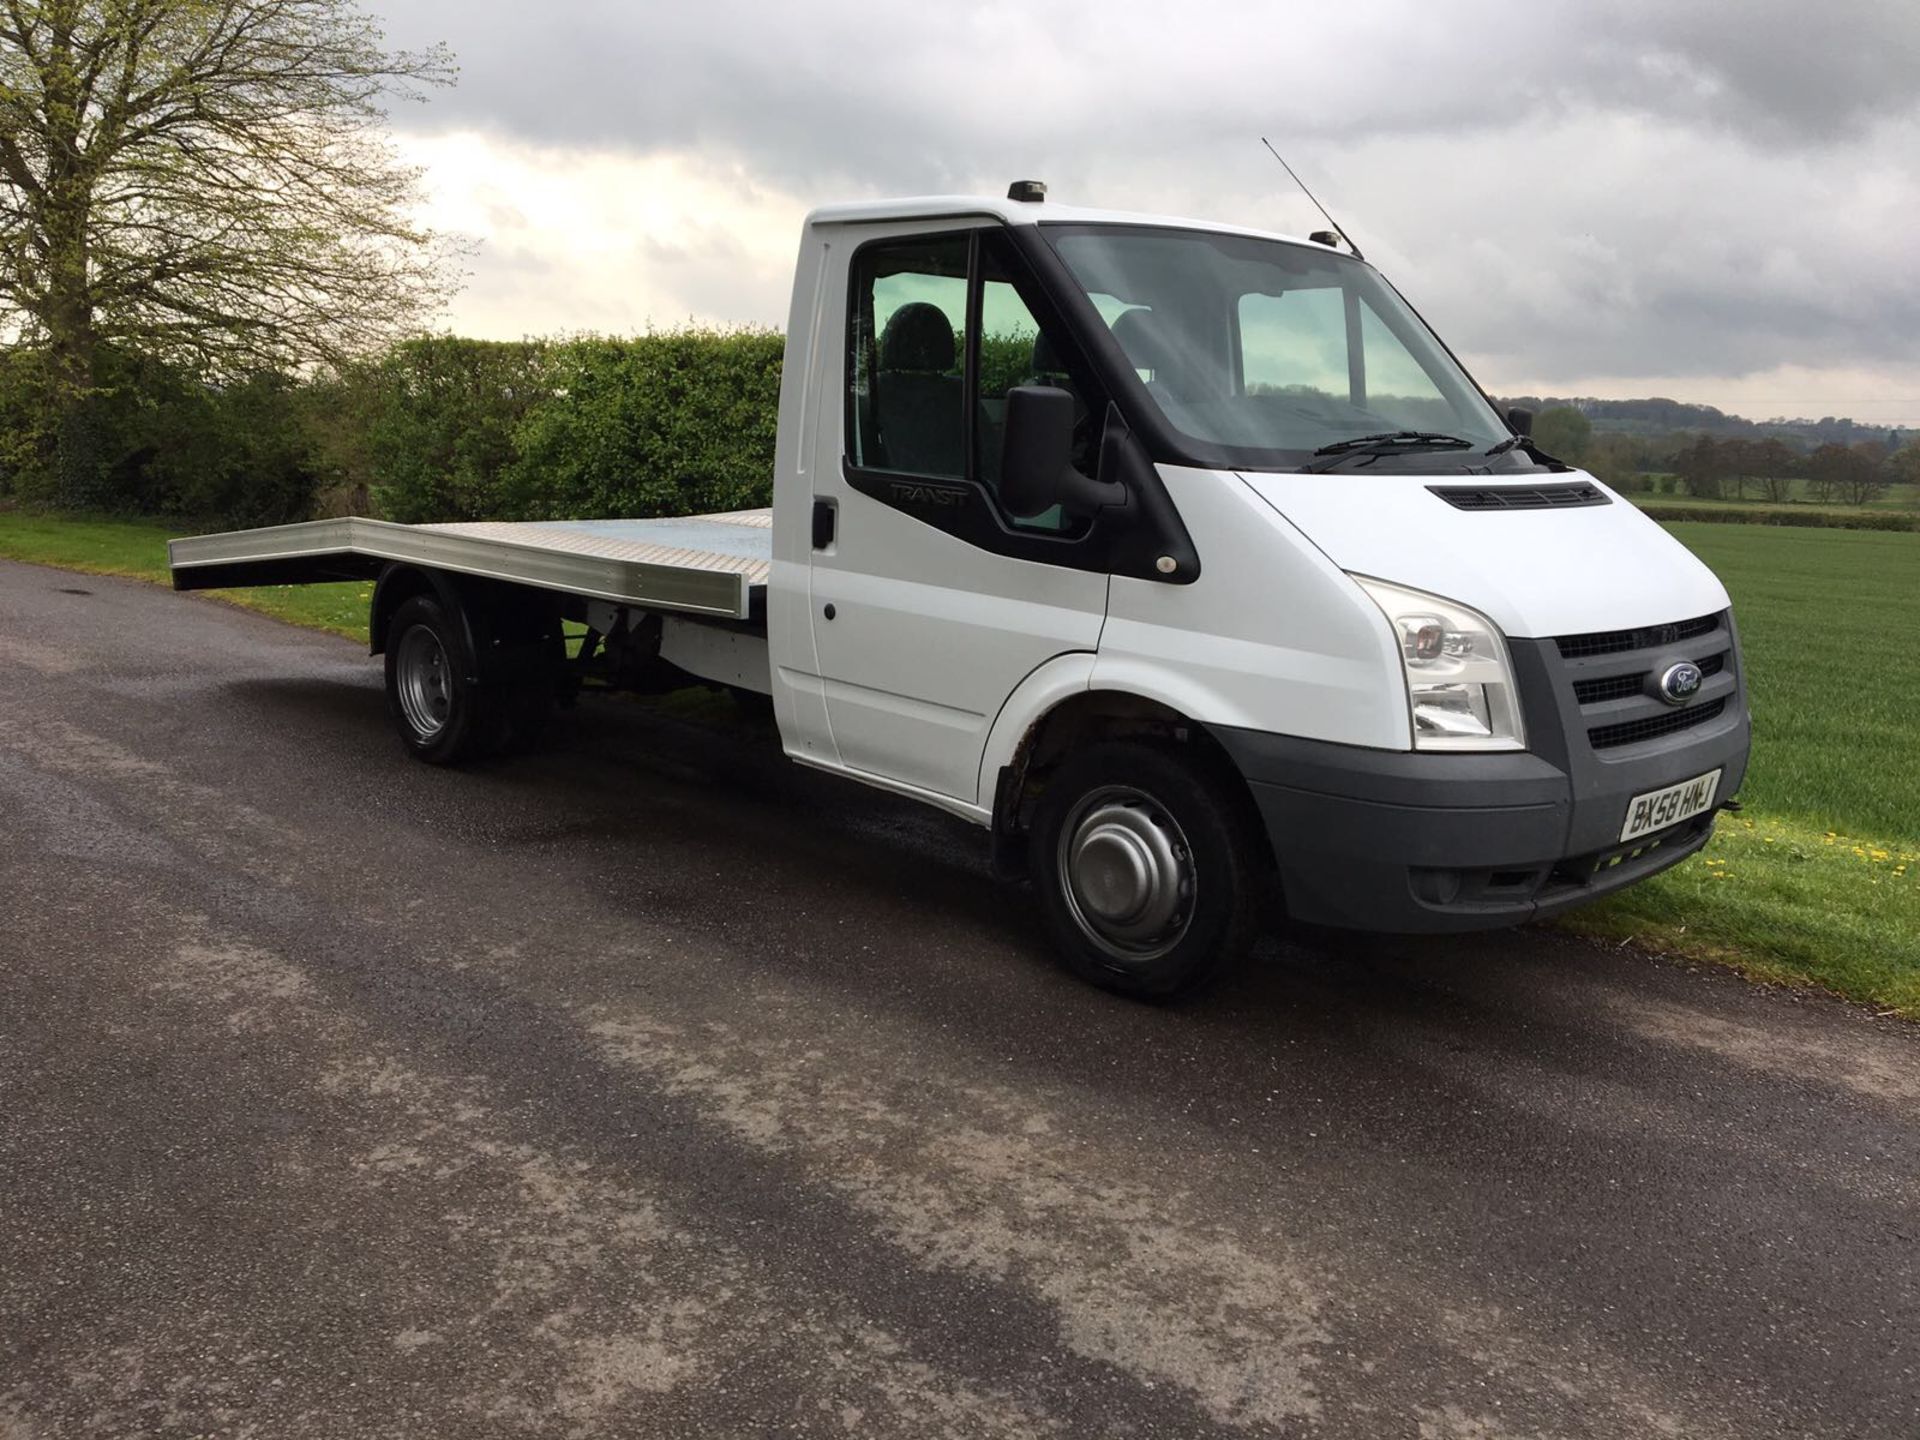 2008/58 REG FORD TRANSIT 100 T350M RWD RECOVERY VEHICLE 14FOOT BED LENGTH